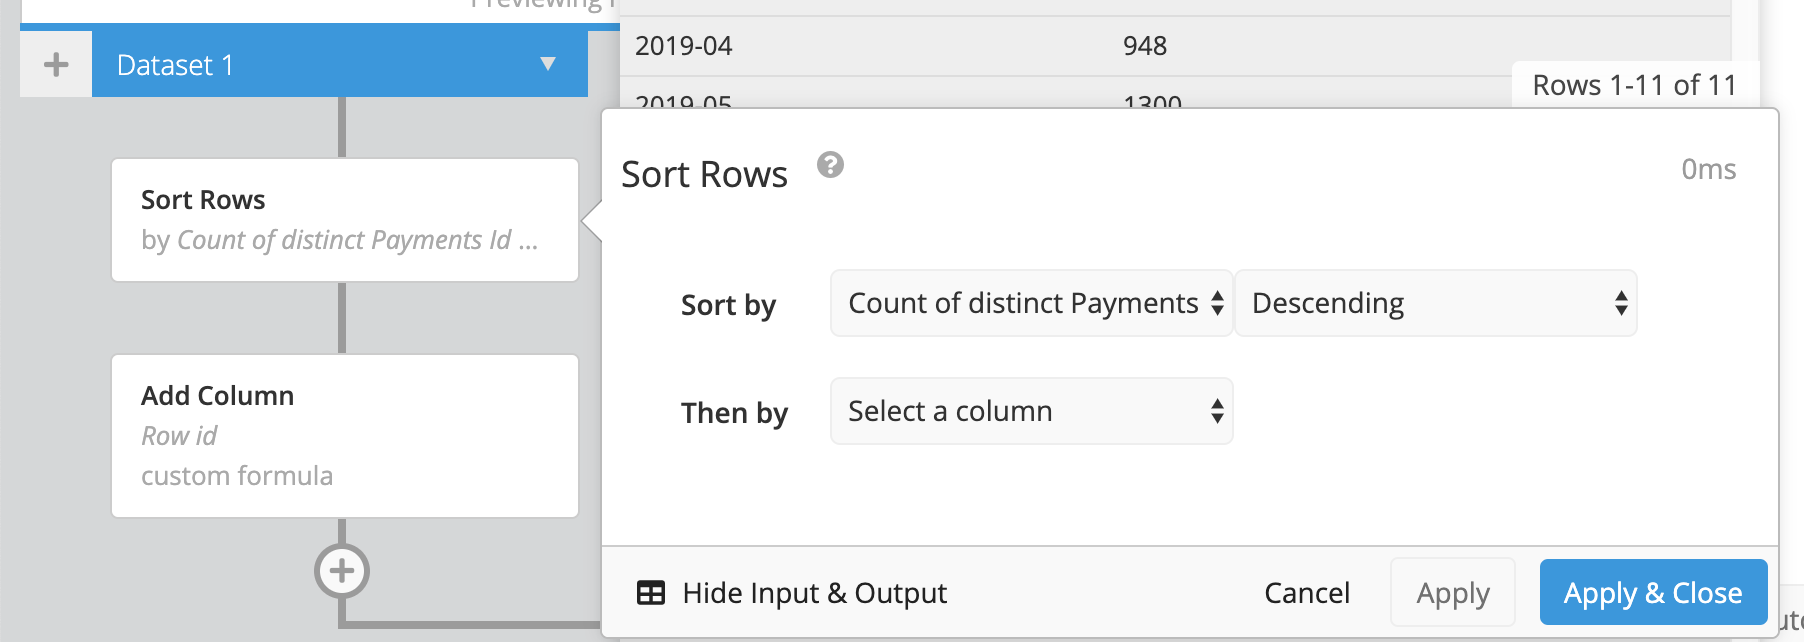 Sort Rows in the Pipeline before the Add Column step